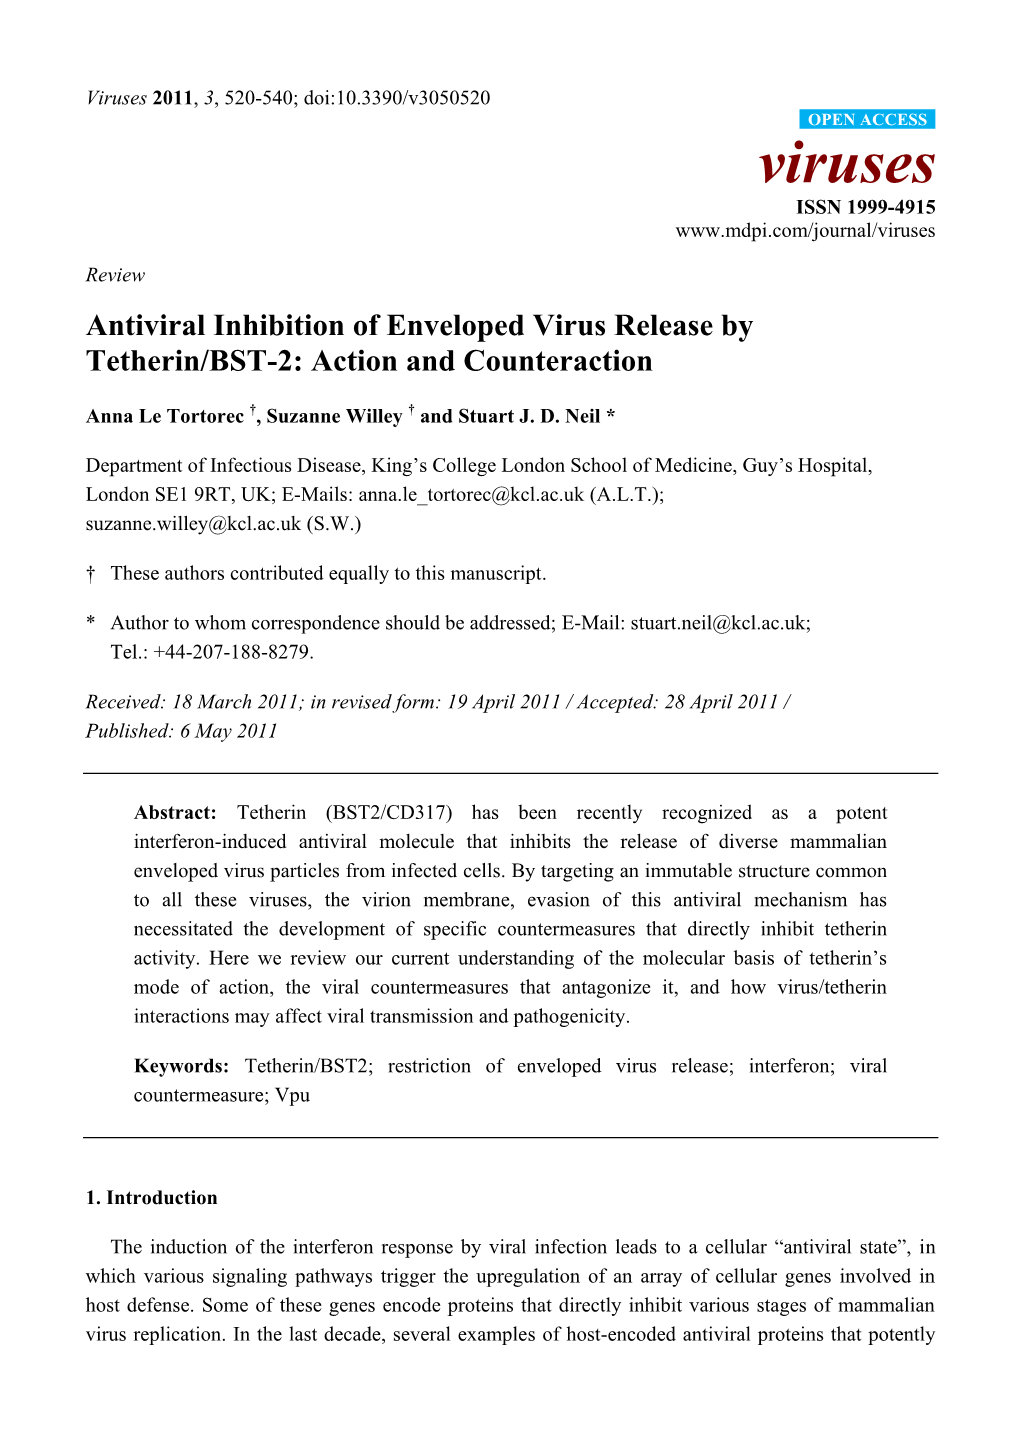 Antiviral Inhibition of Enveloped Virus Release by Tetherin/BST-2: Action and Counteraction